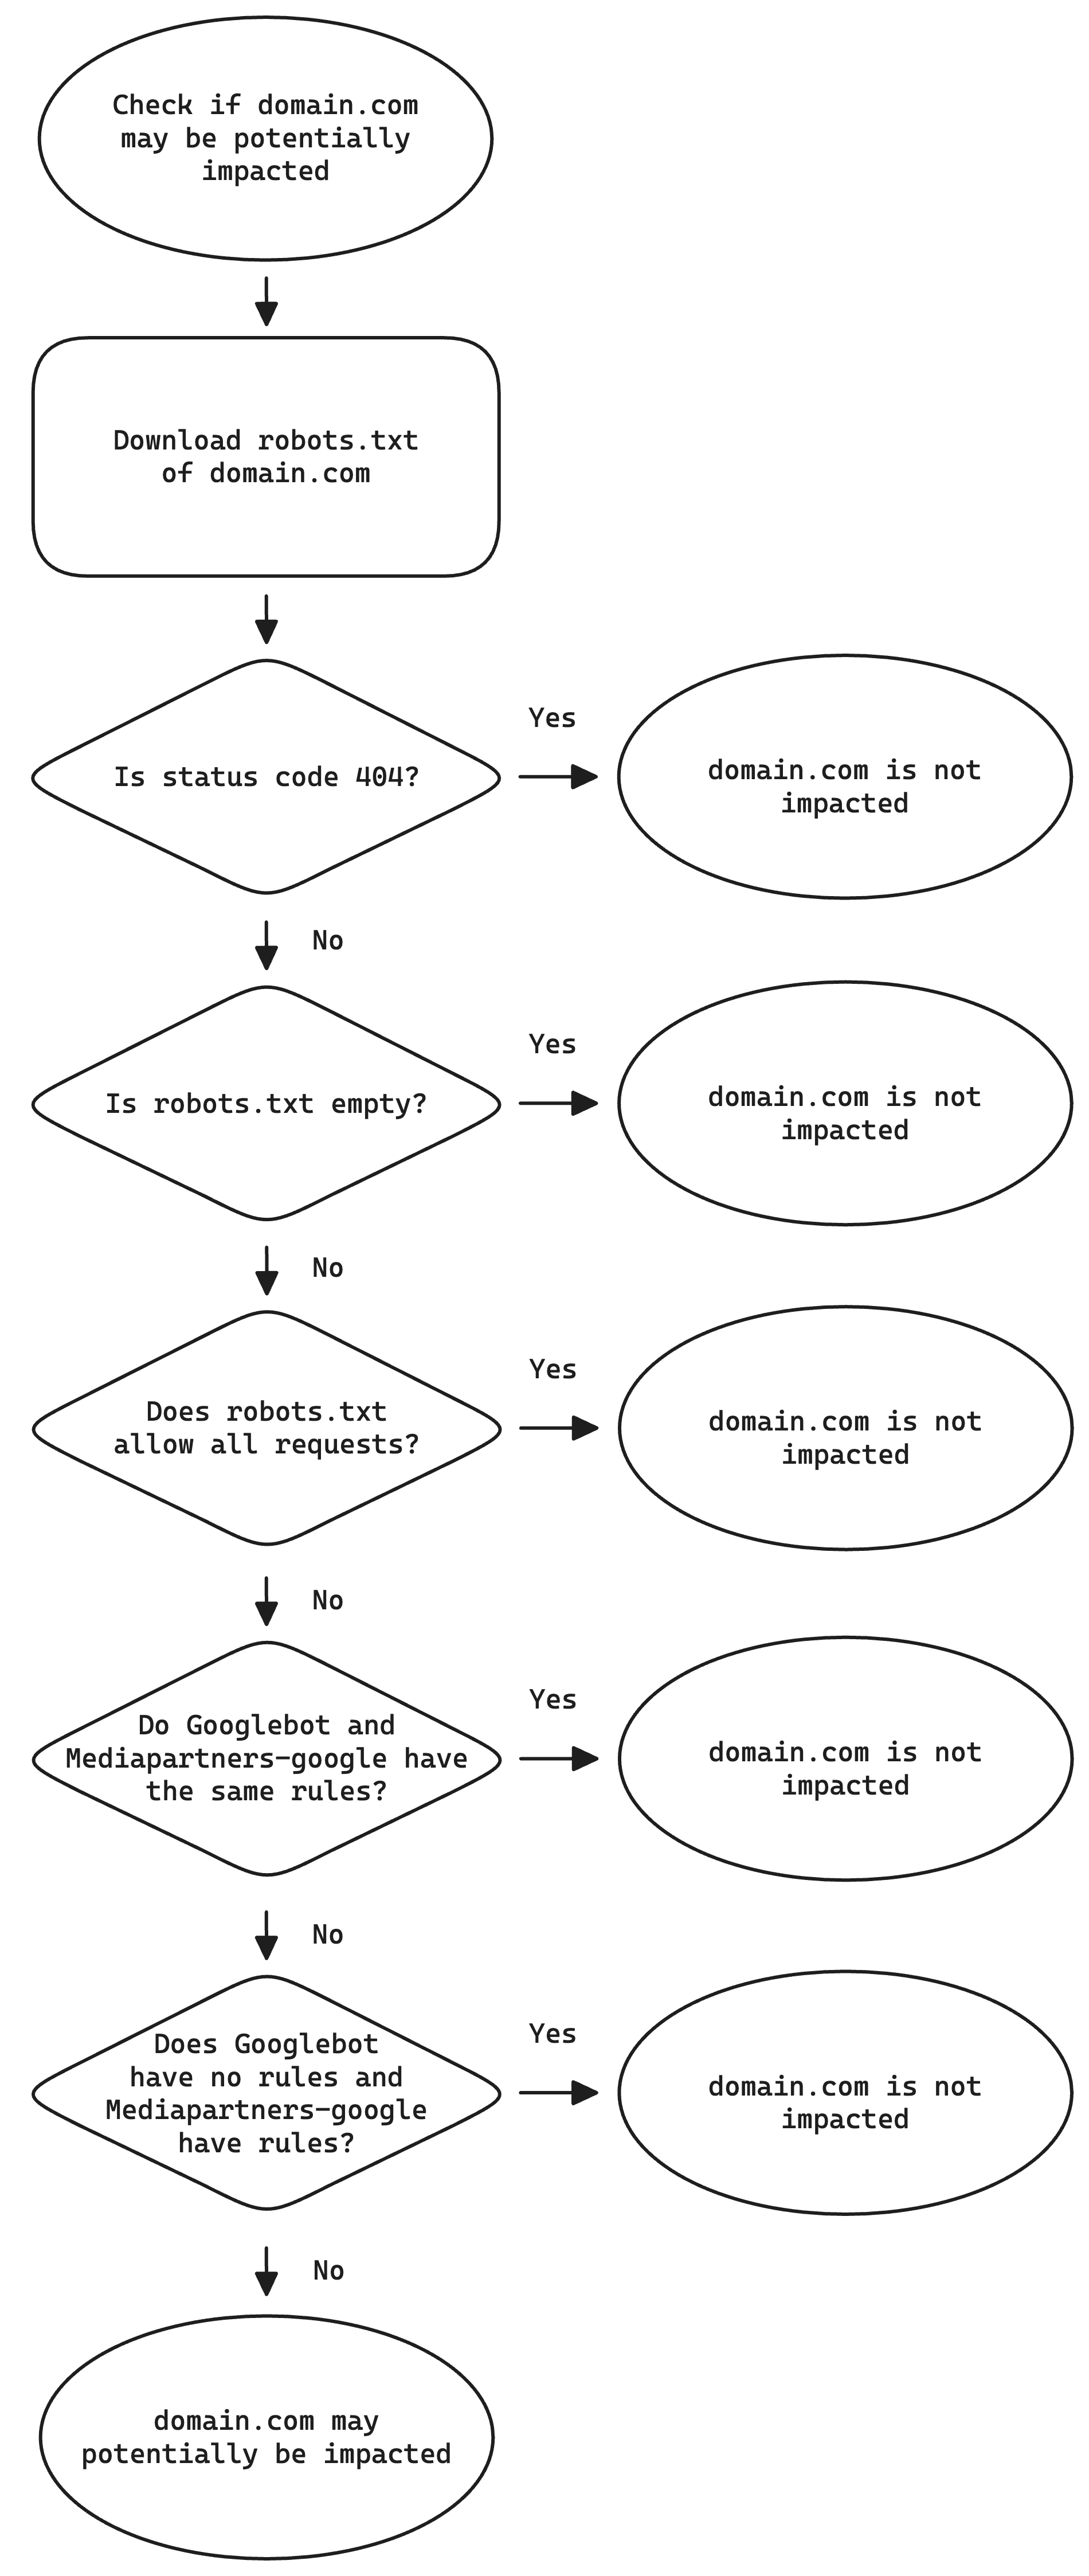 Flowchart to define if a domain is impacted or not.